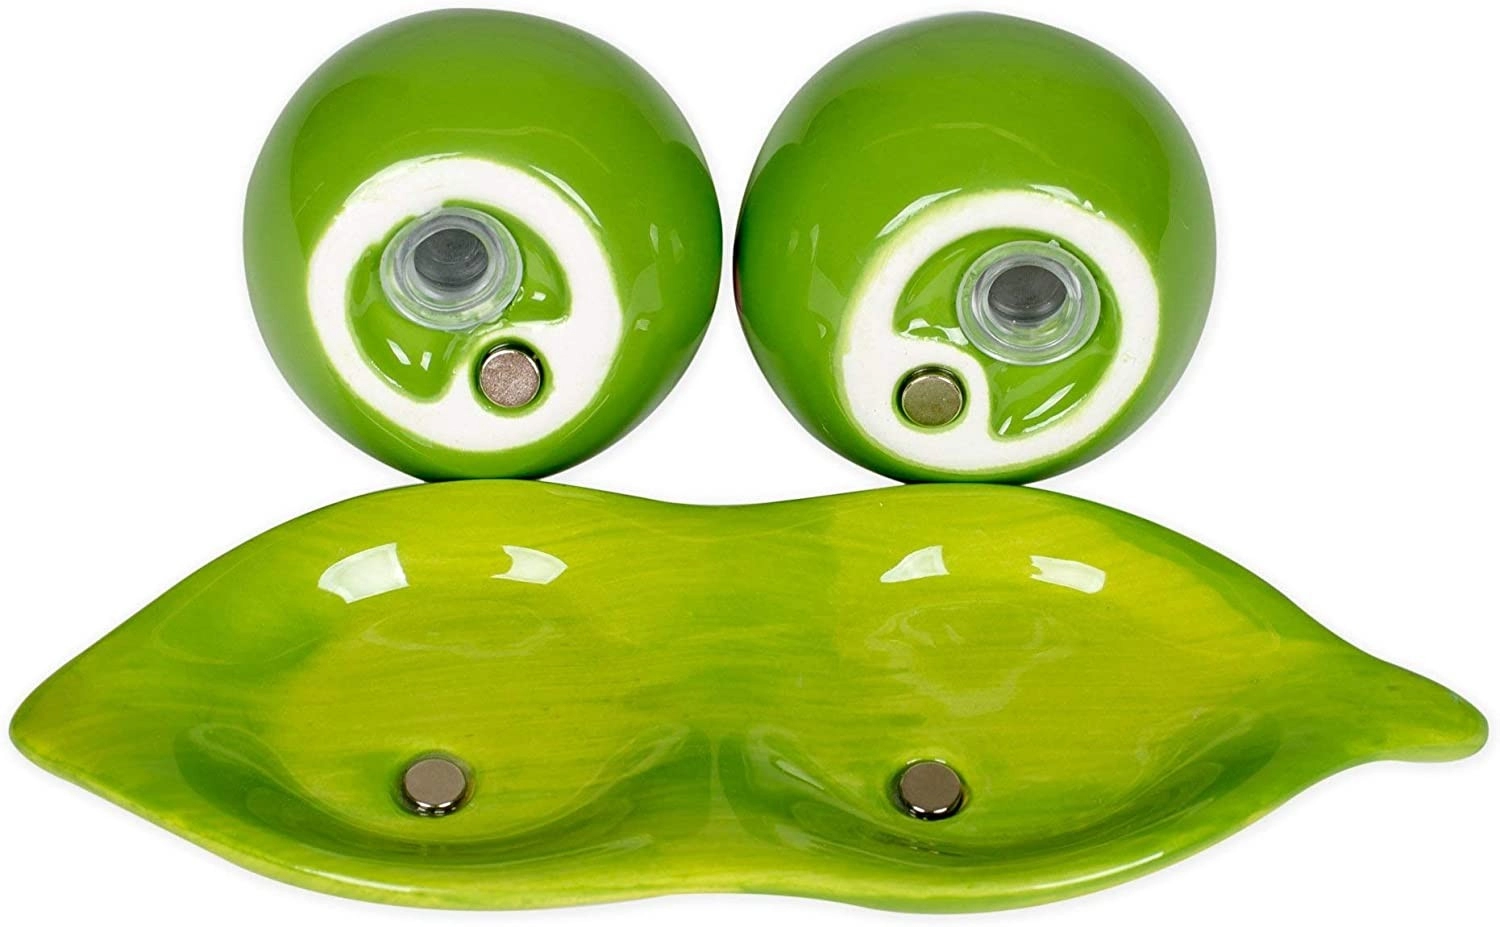 Green Peas Ceramic Magnetic Salt and Pepper Shakers 3 Piece